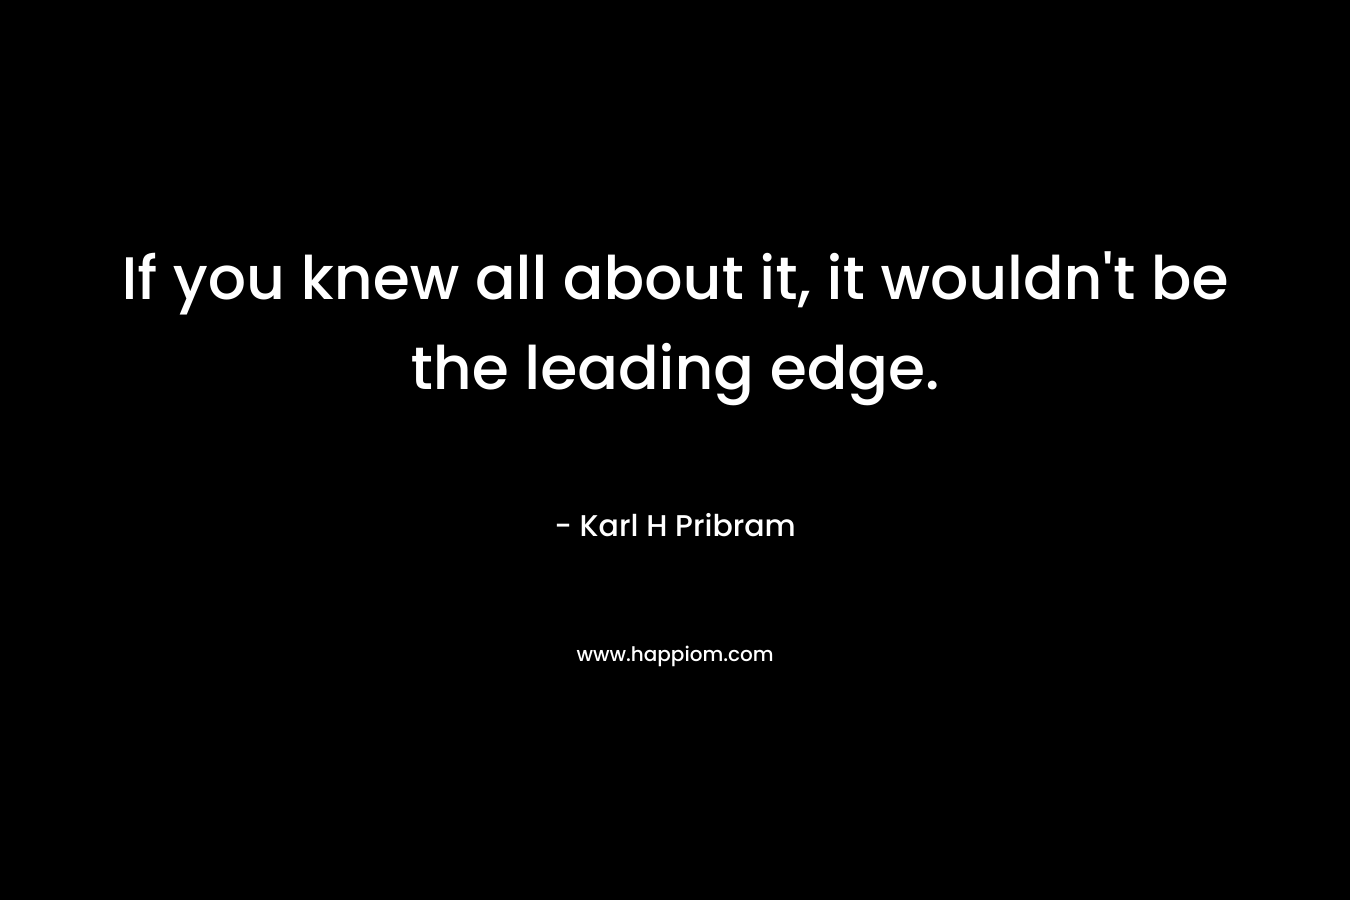 If you knew all about it, it wouldn’t be the leading edge. – Karl H Pribram